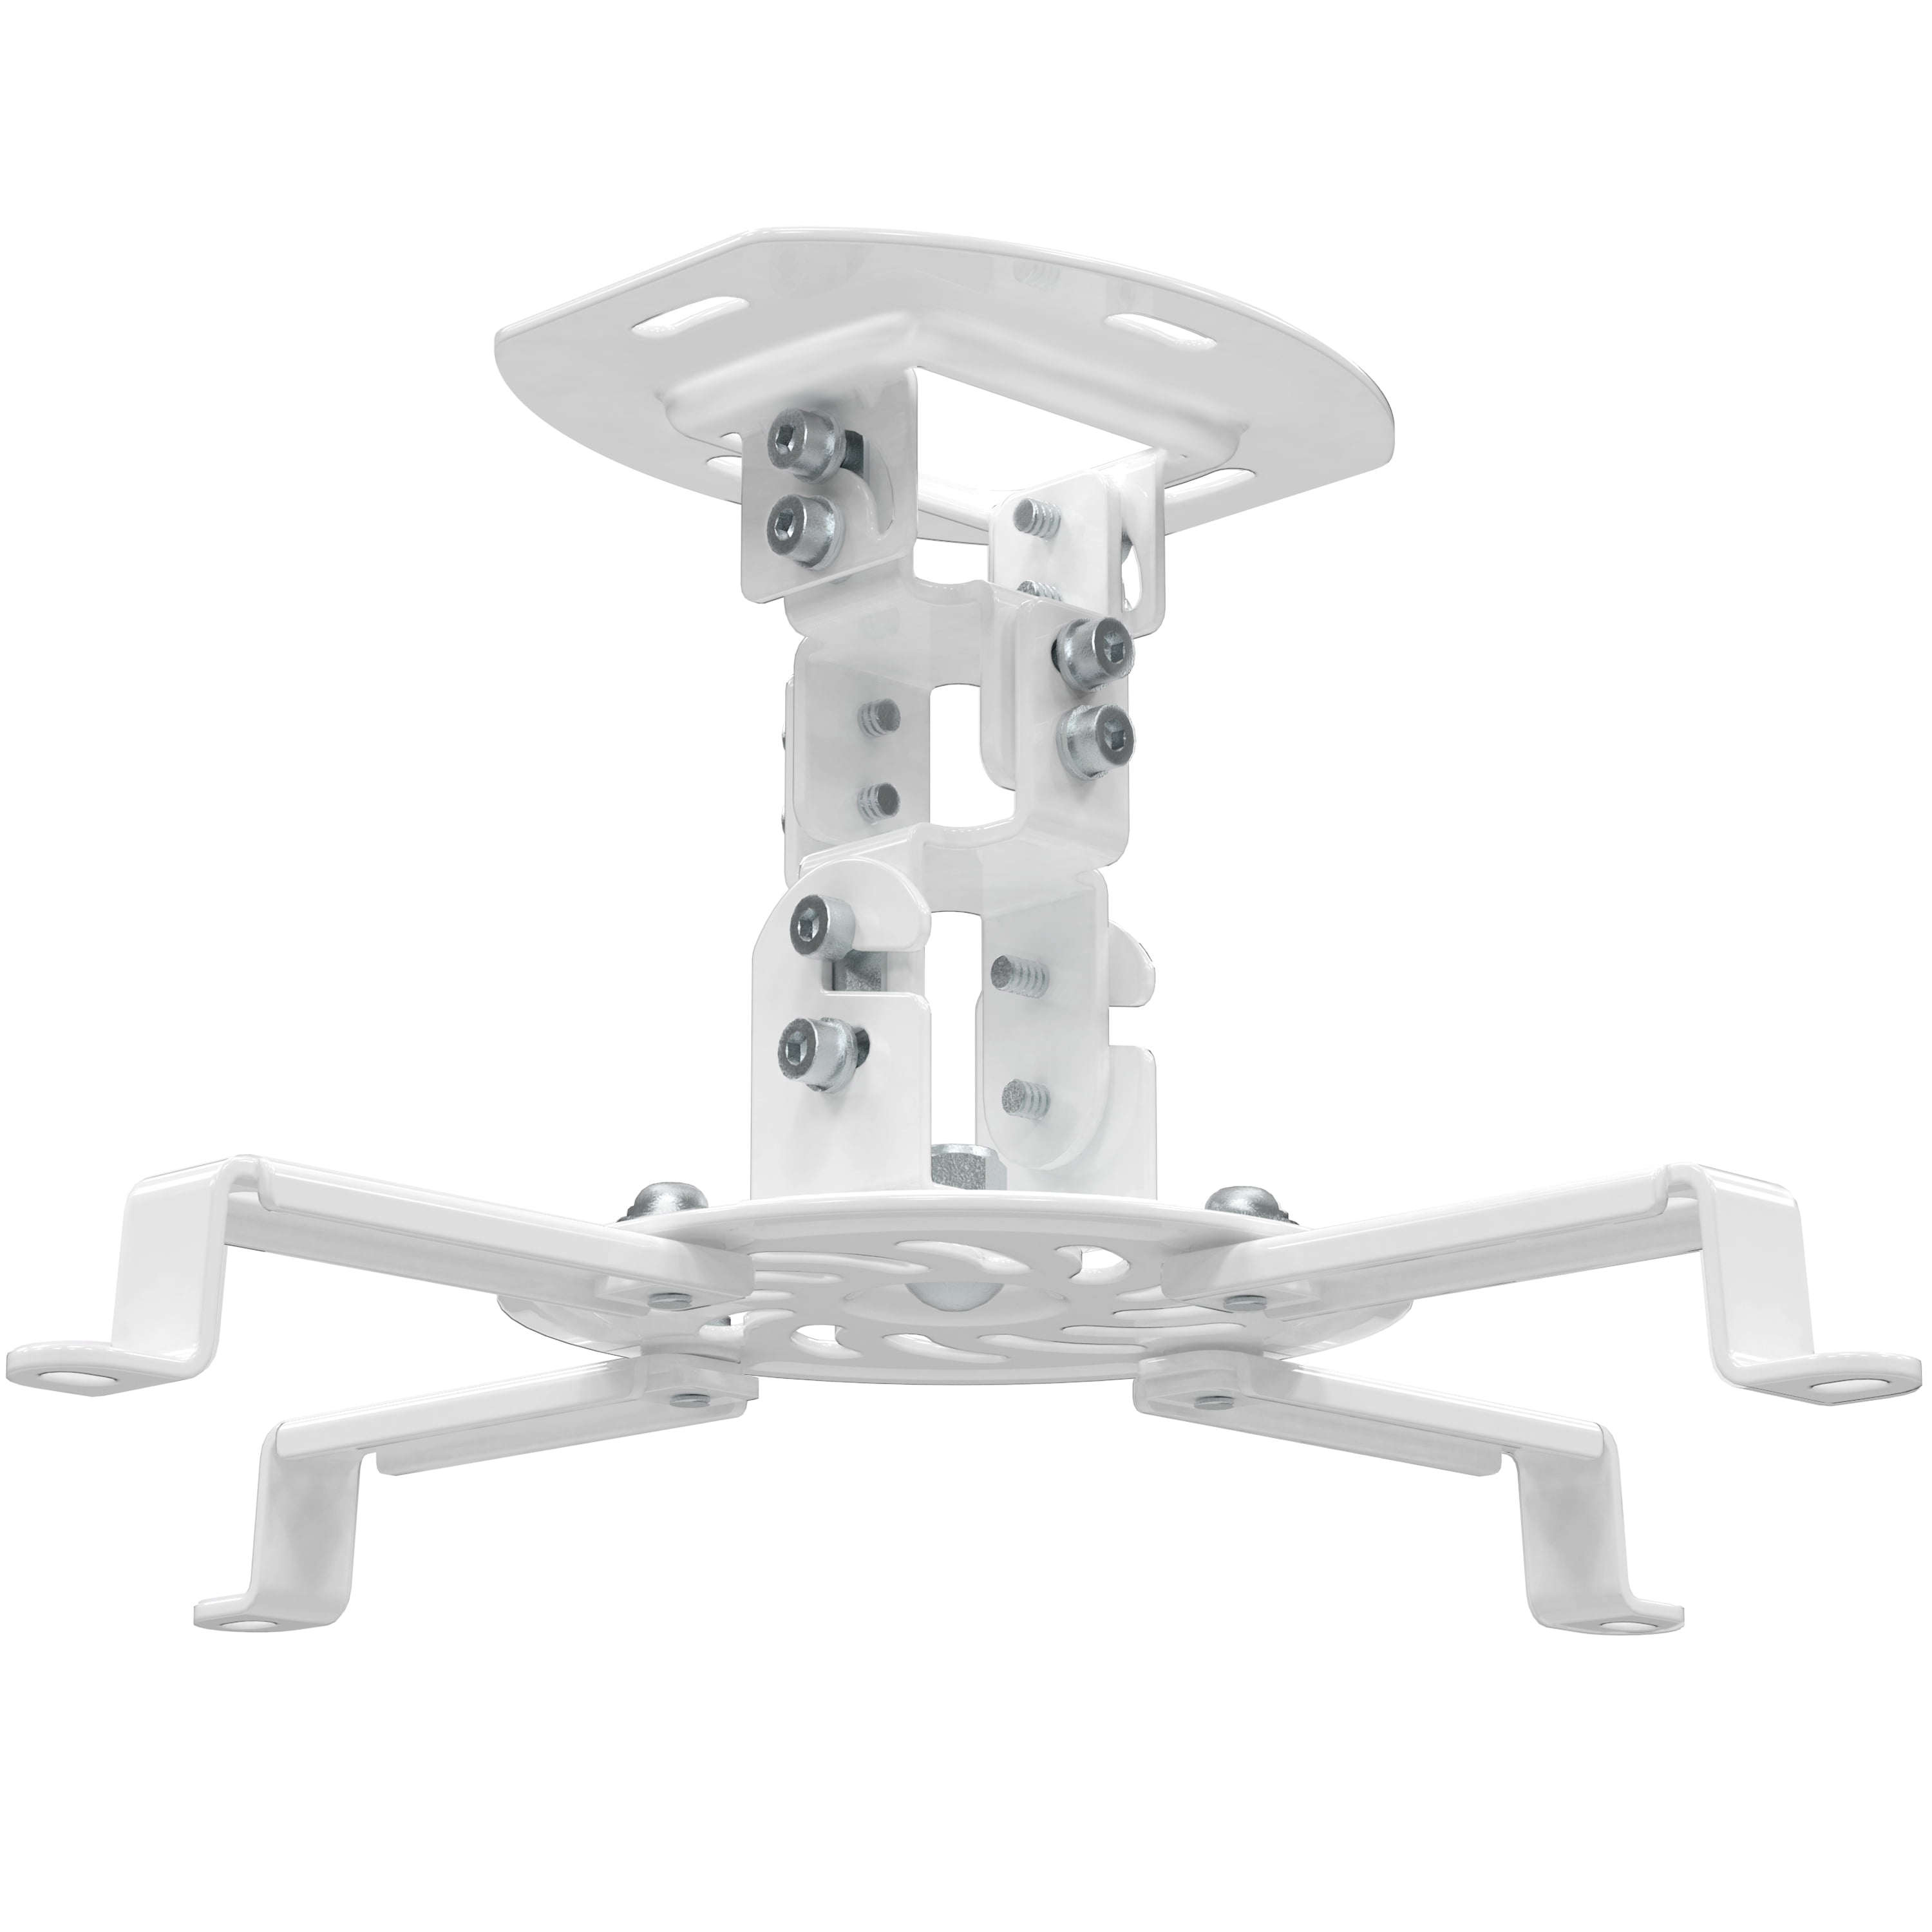 WALI Projector Ceiling Mount, Universal Low Profile Projector